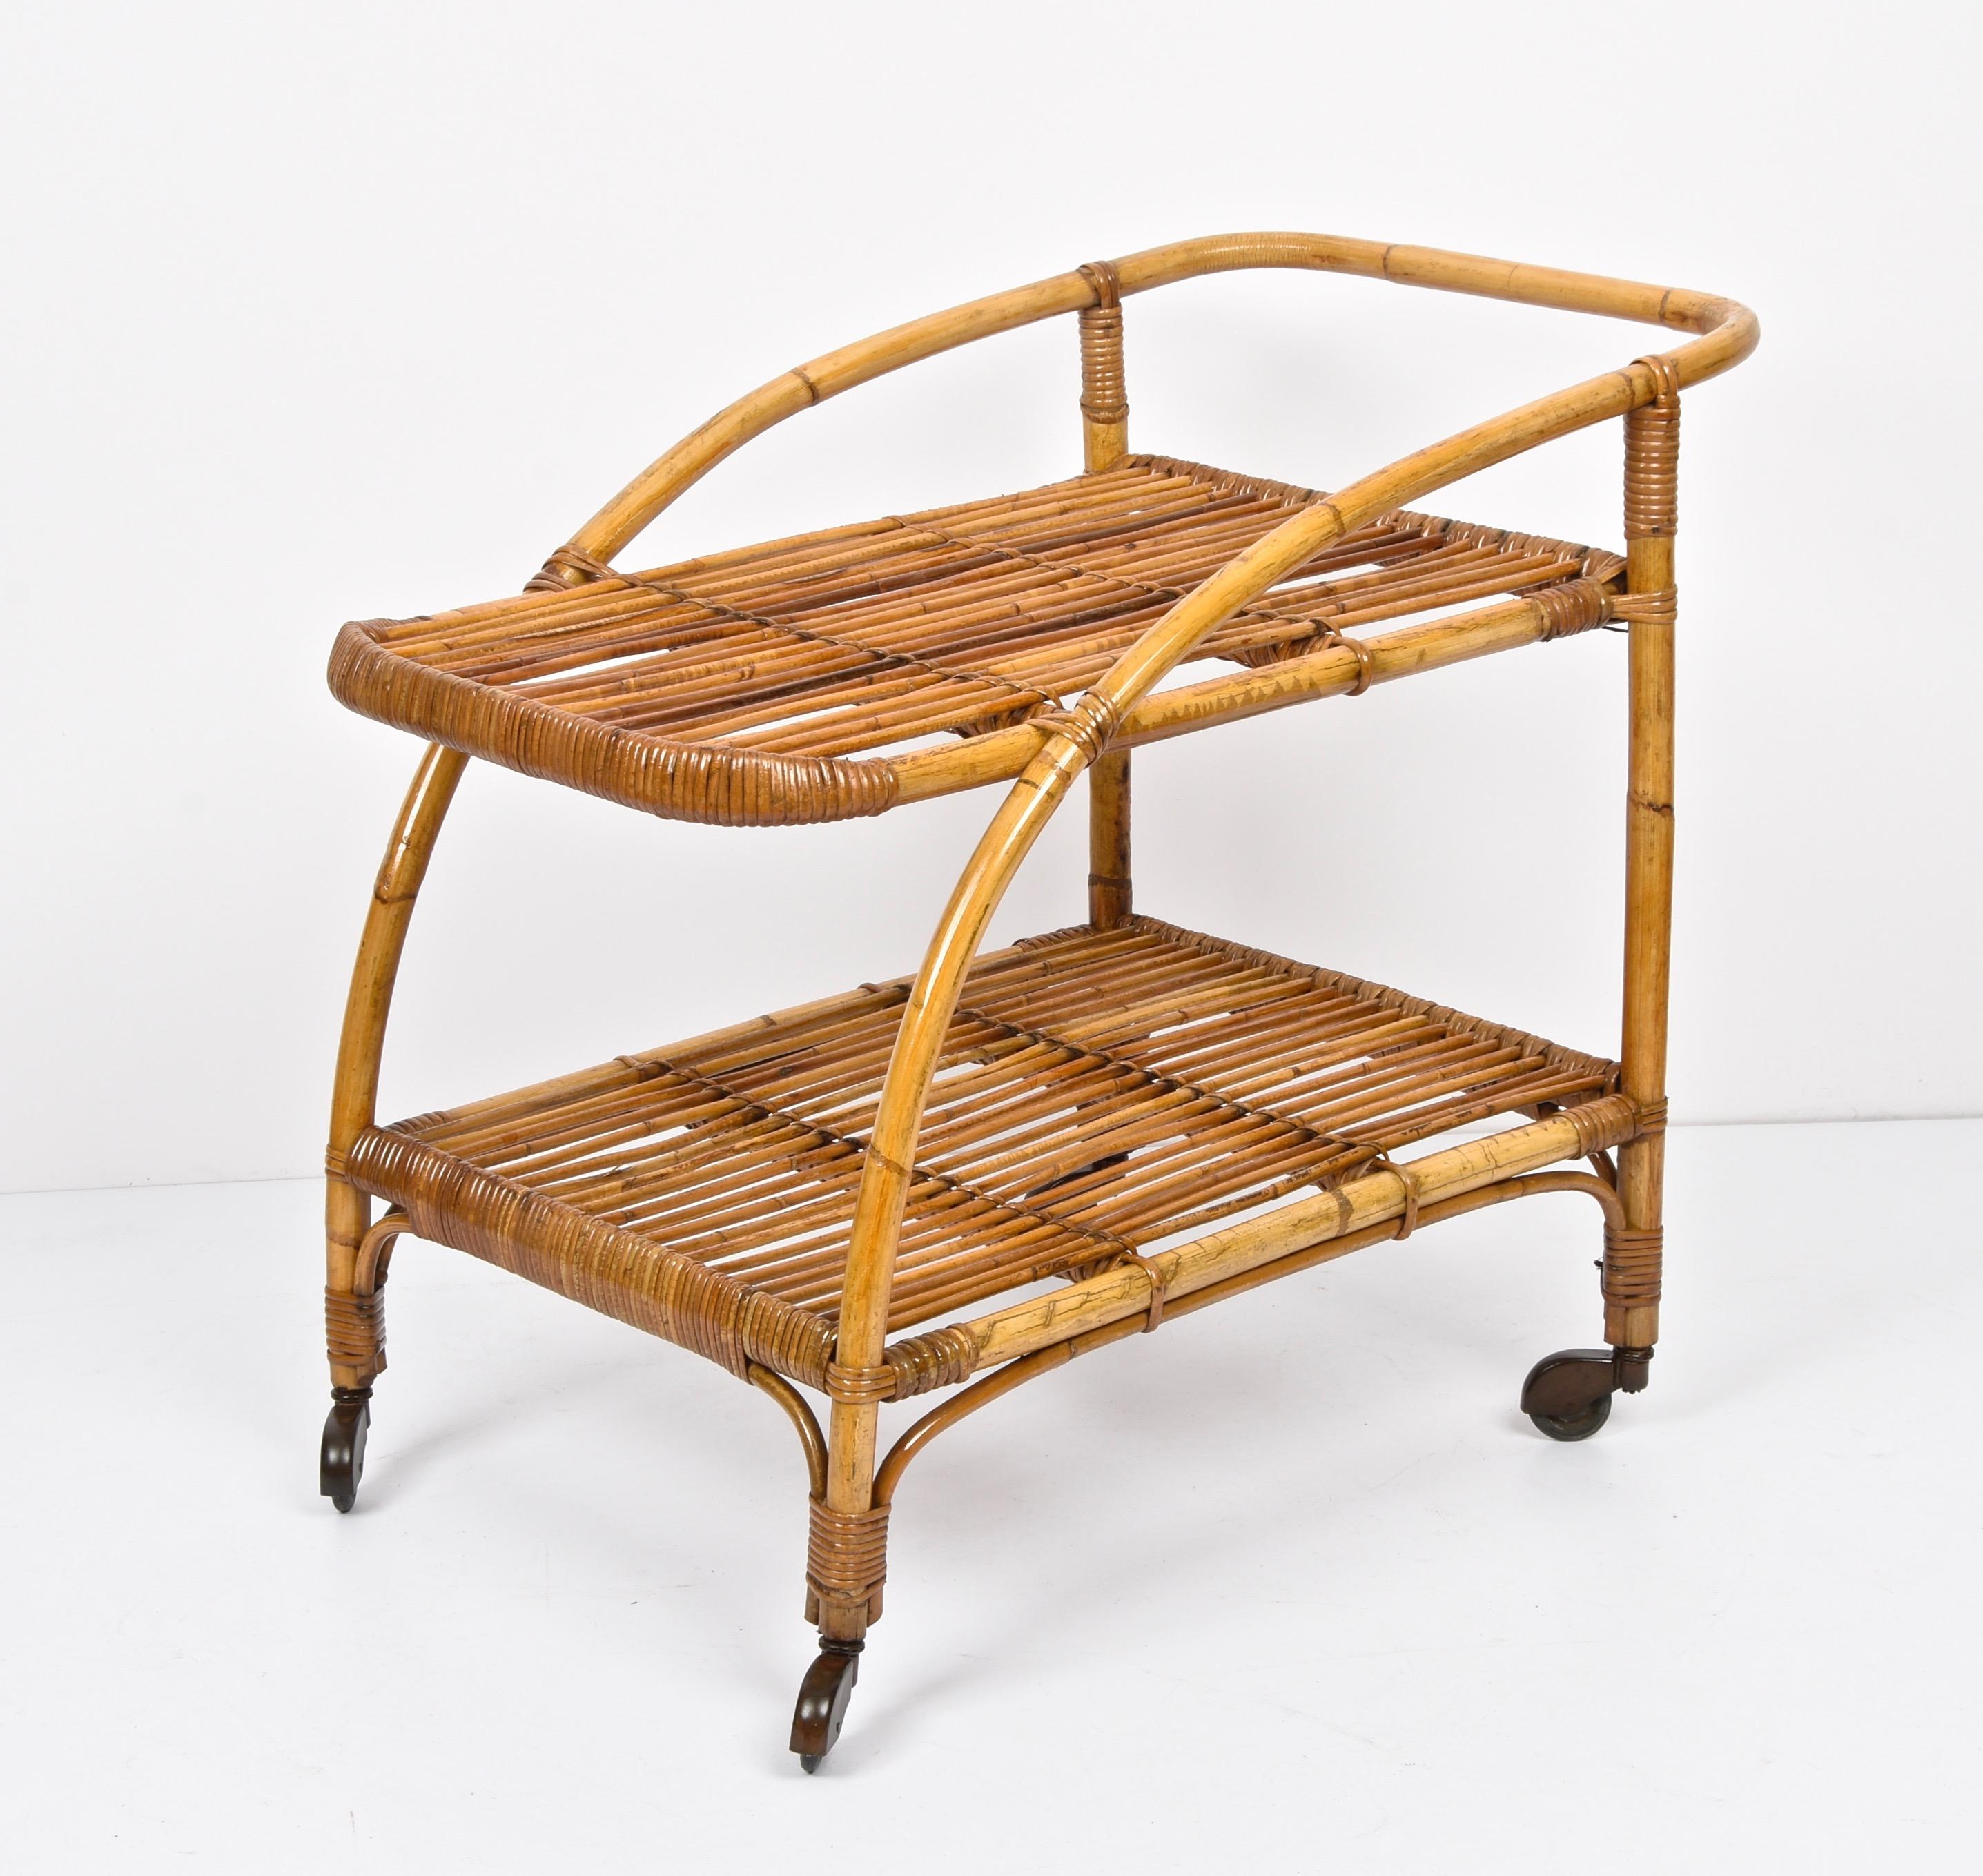 Amazing midcentury in bamboo and rattan with wheels. This unique piece was produced in Italy during the 1950s.

This piece is in fantastic vintage condition and you are going to love the connection between straight and curved lines

A fabulous